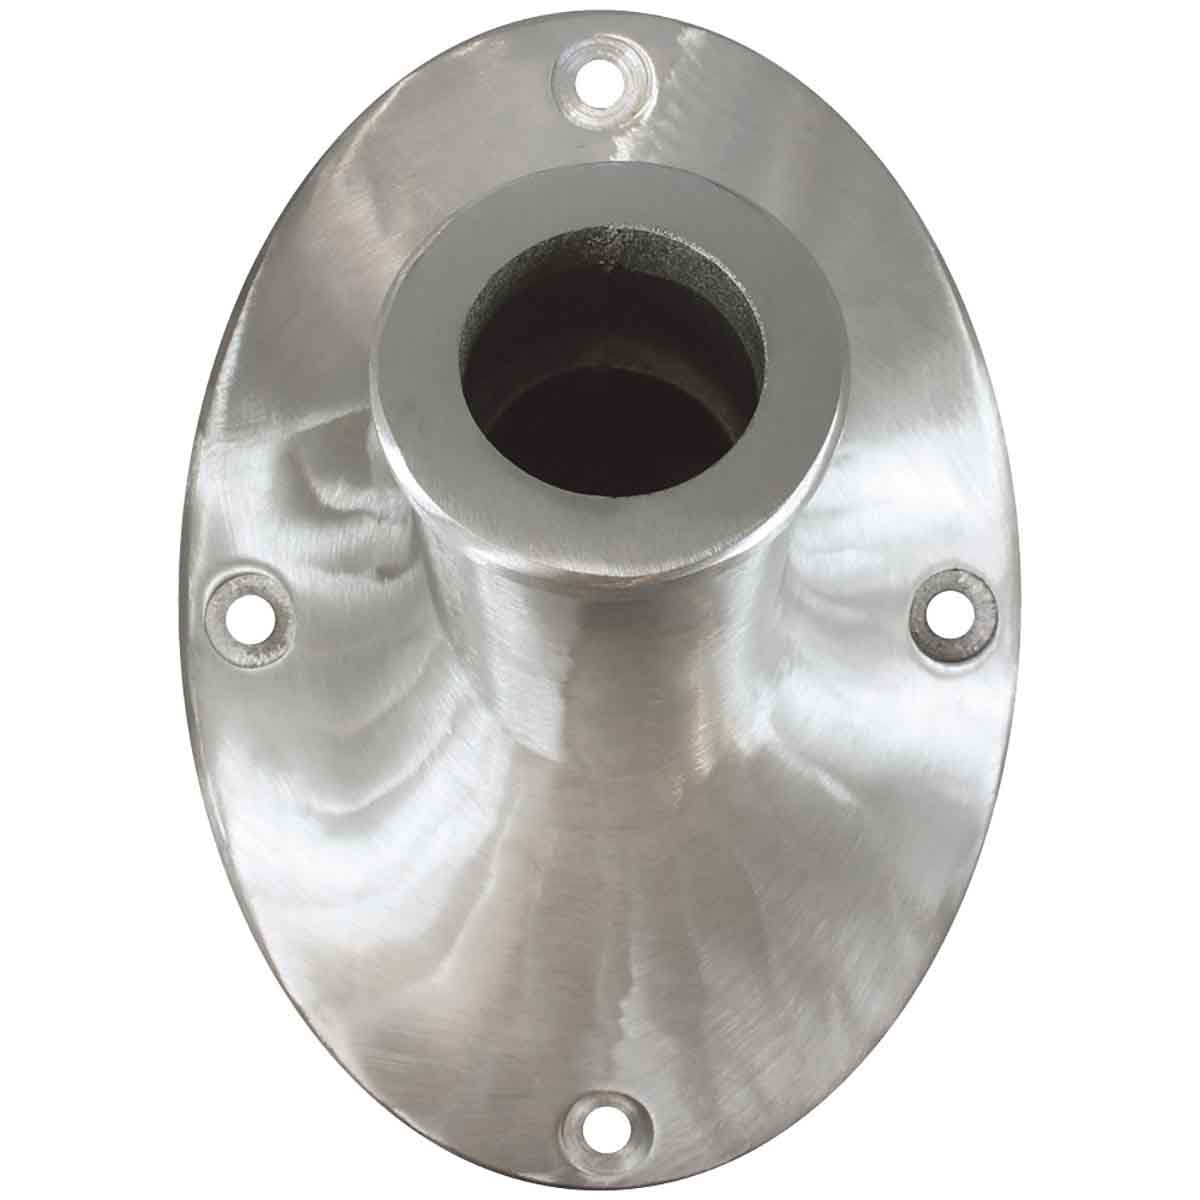 Outrigger Wall Mount Series - Satin